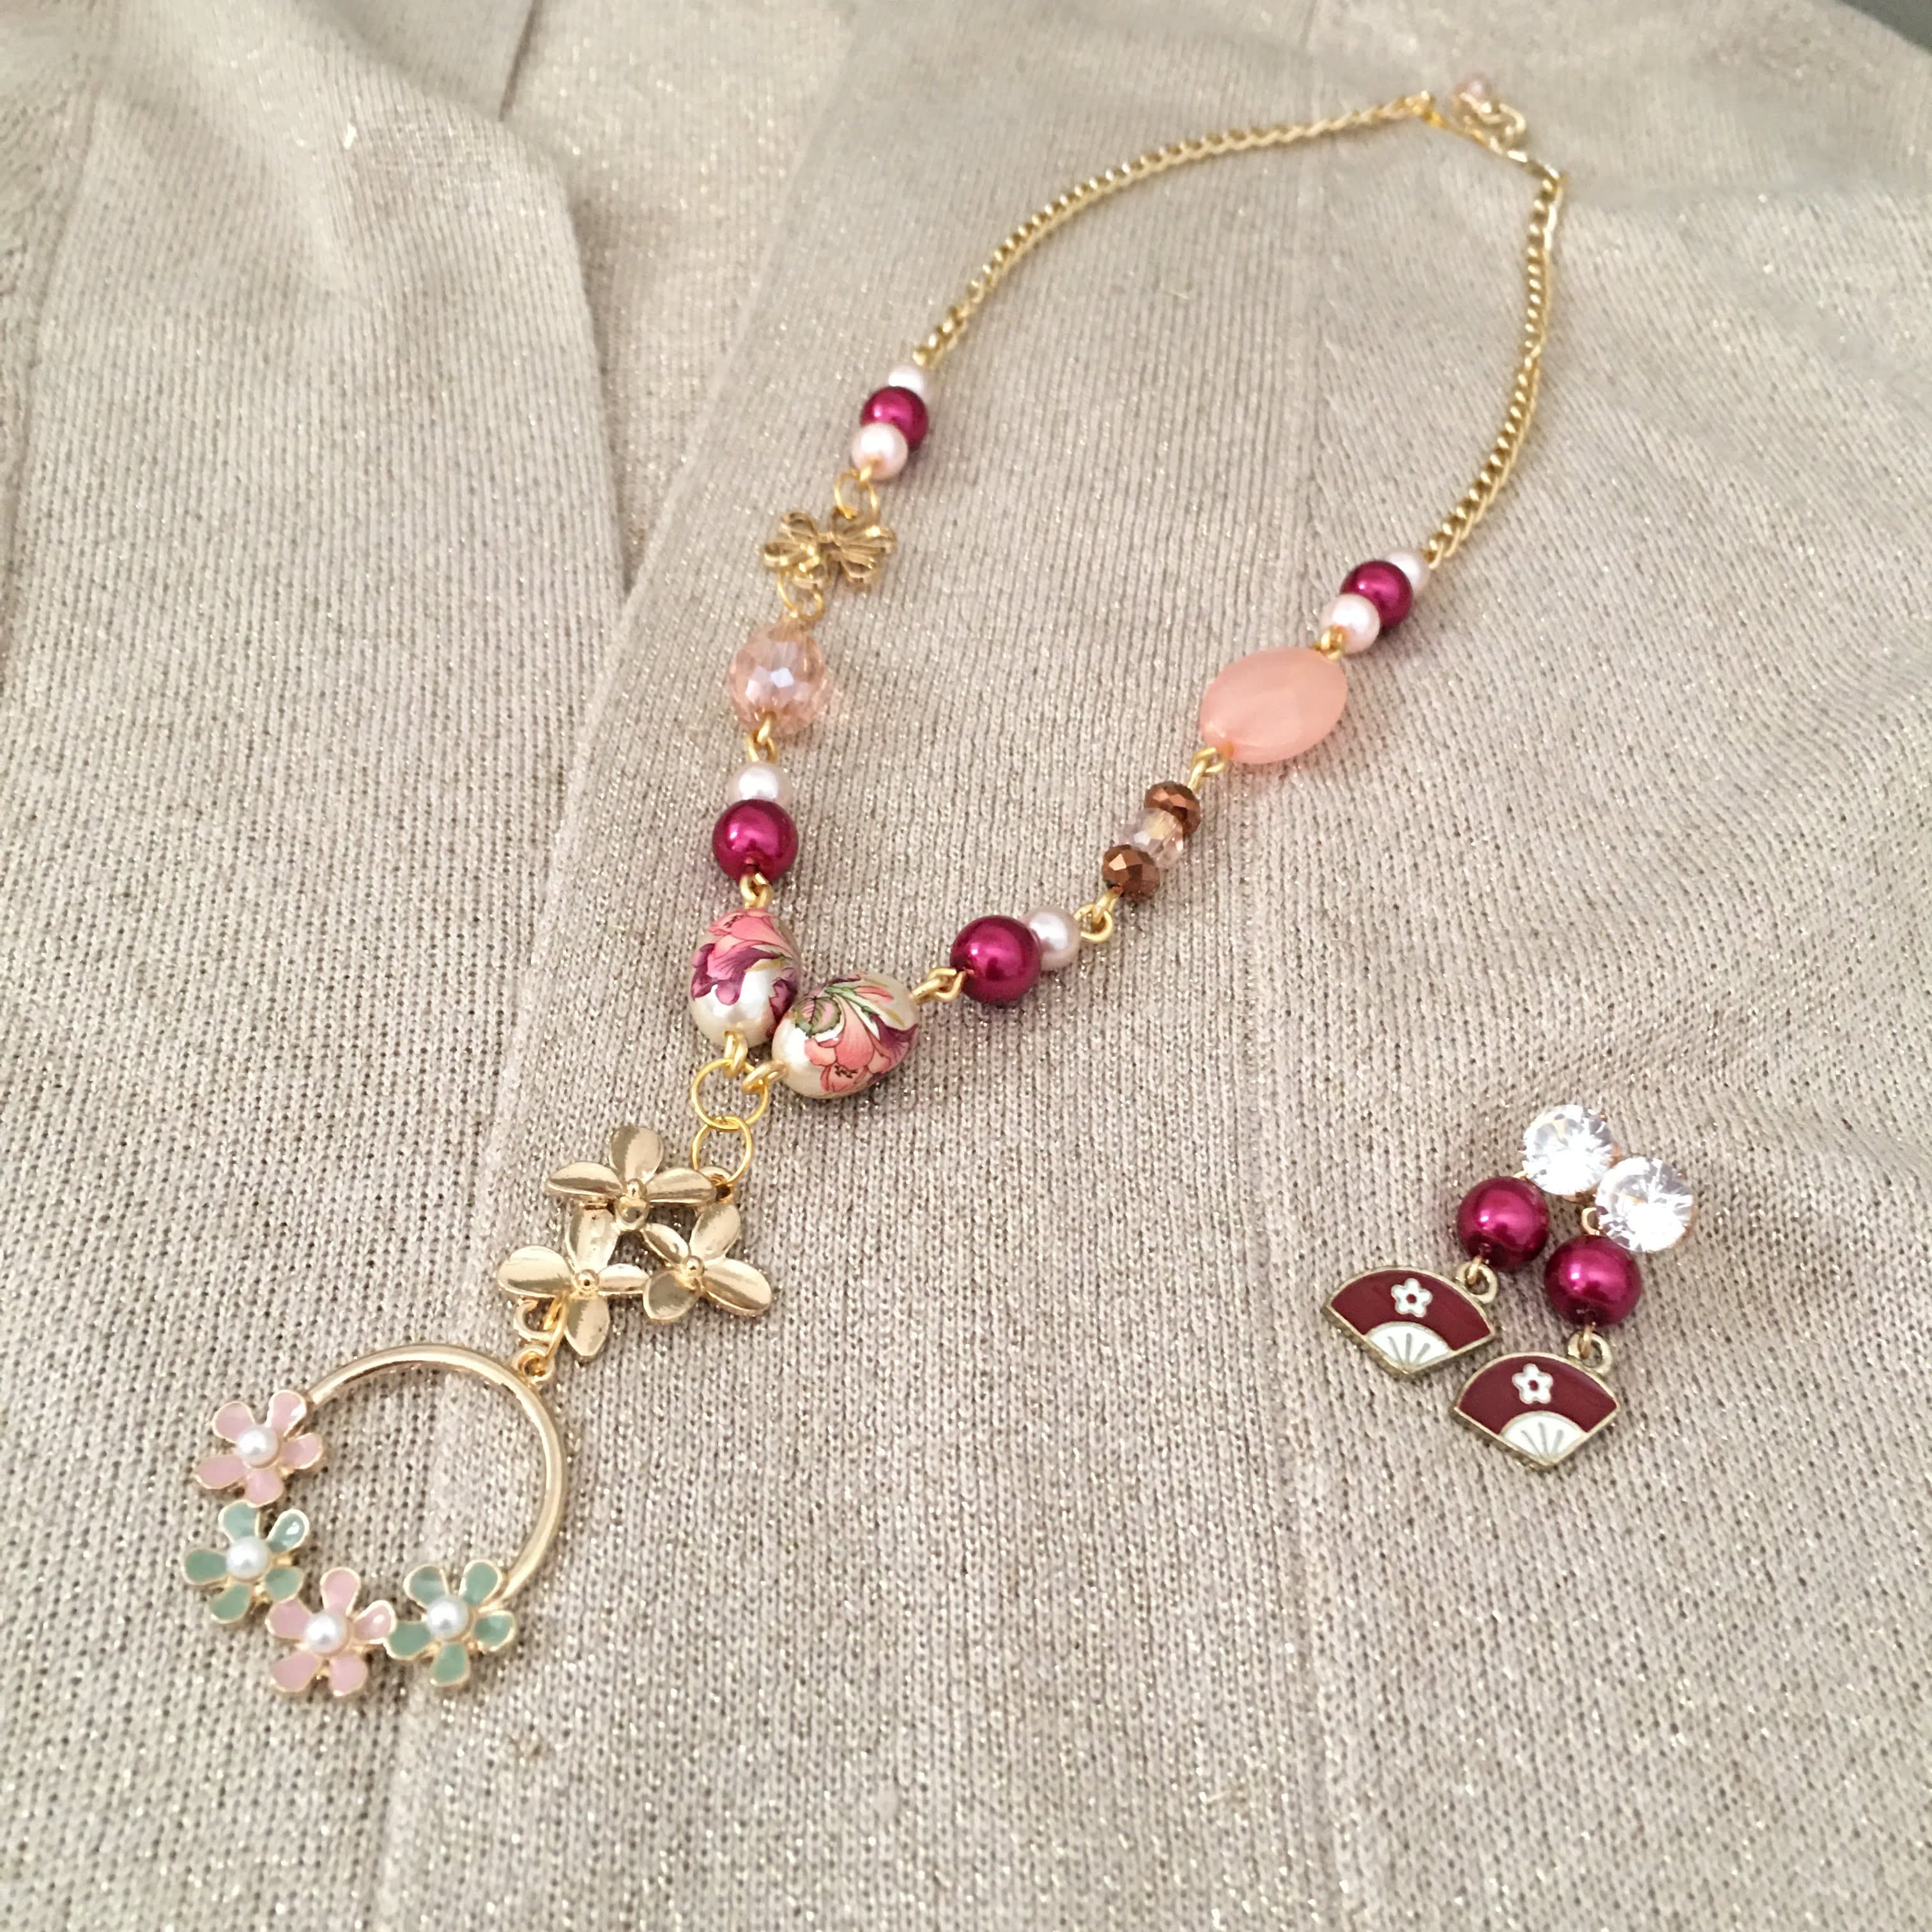 Classic Gold Plated Floral Charm Necklace and Japanese themed Earrings